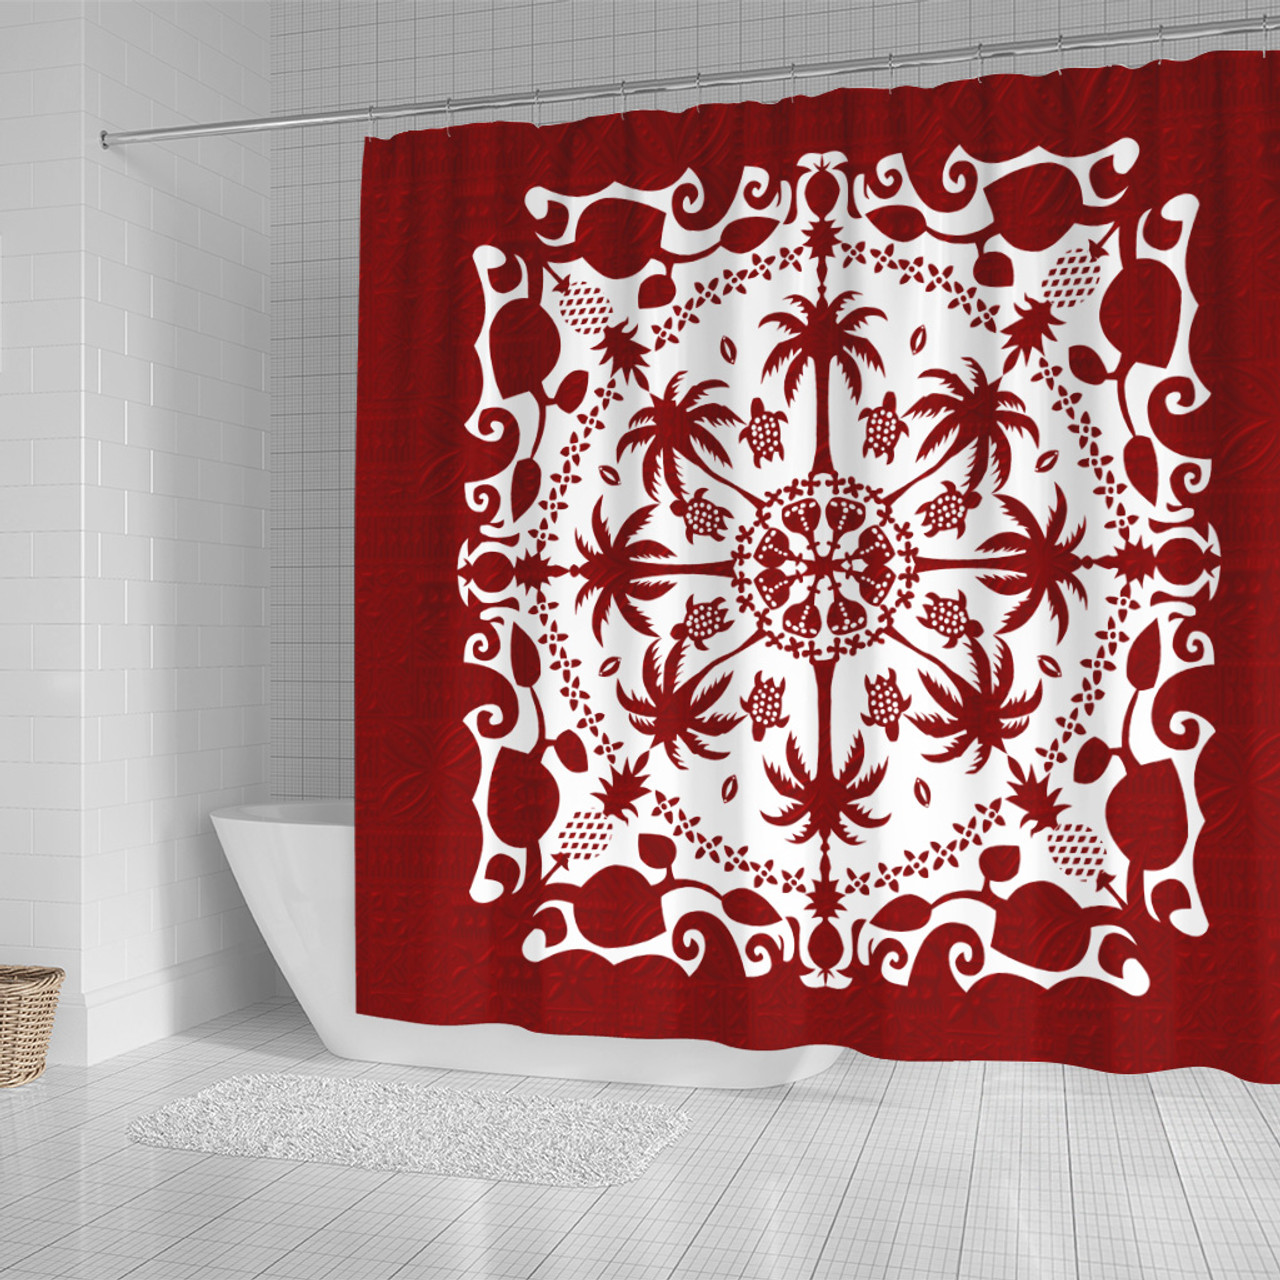 Hawaii Shower Curtain Red Hawaii Pattern Palm Trees and Turtles Polynesian